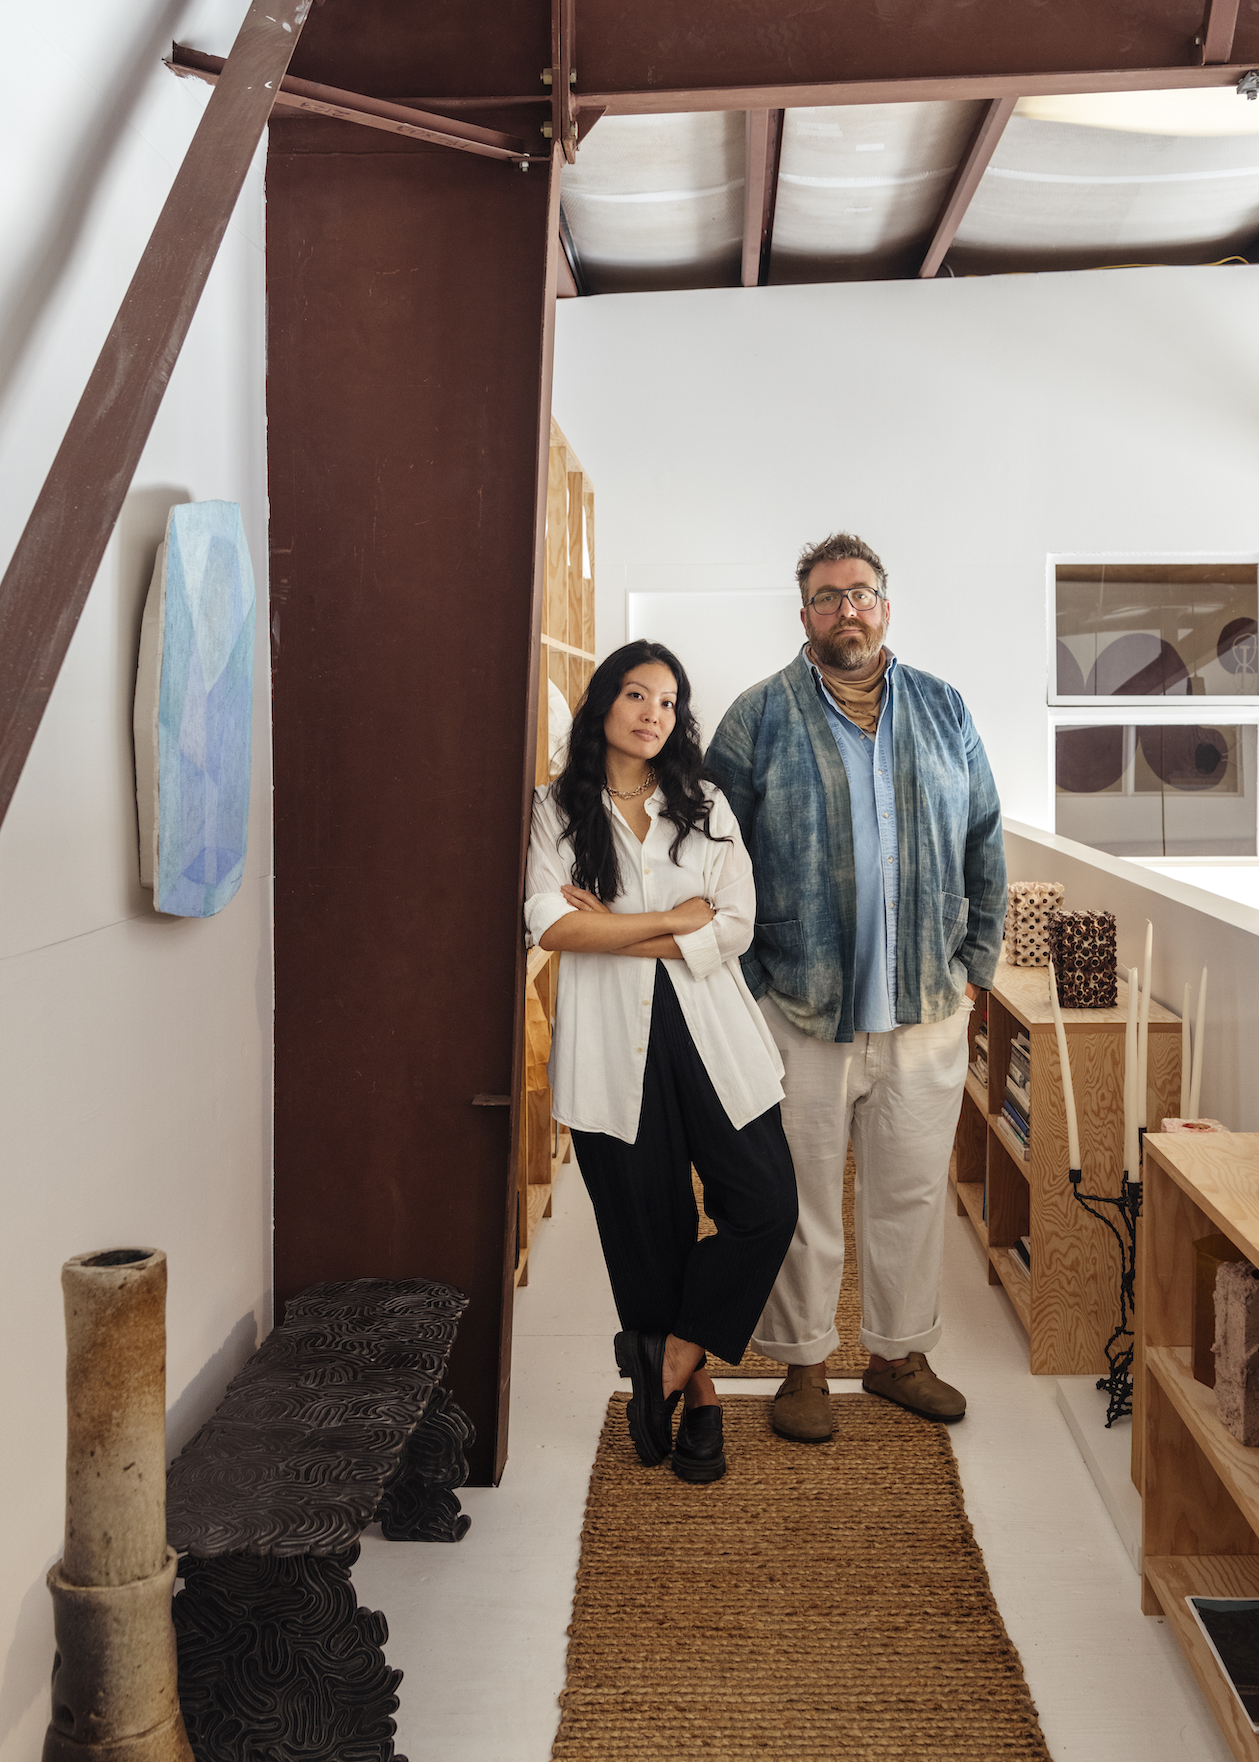 Portrait of Heidi Korsavong and Benjamin Critton surrounded by furniture objects